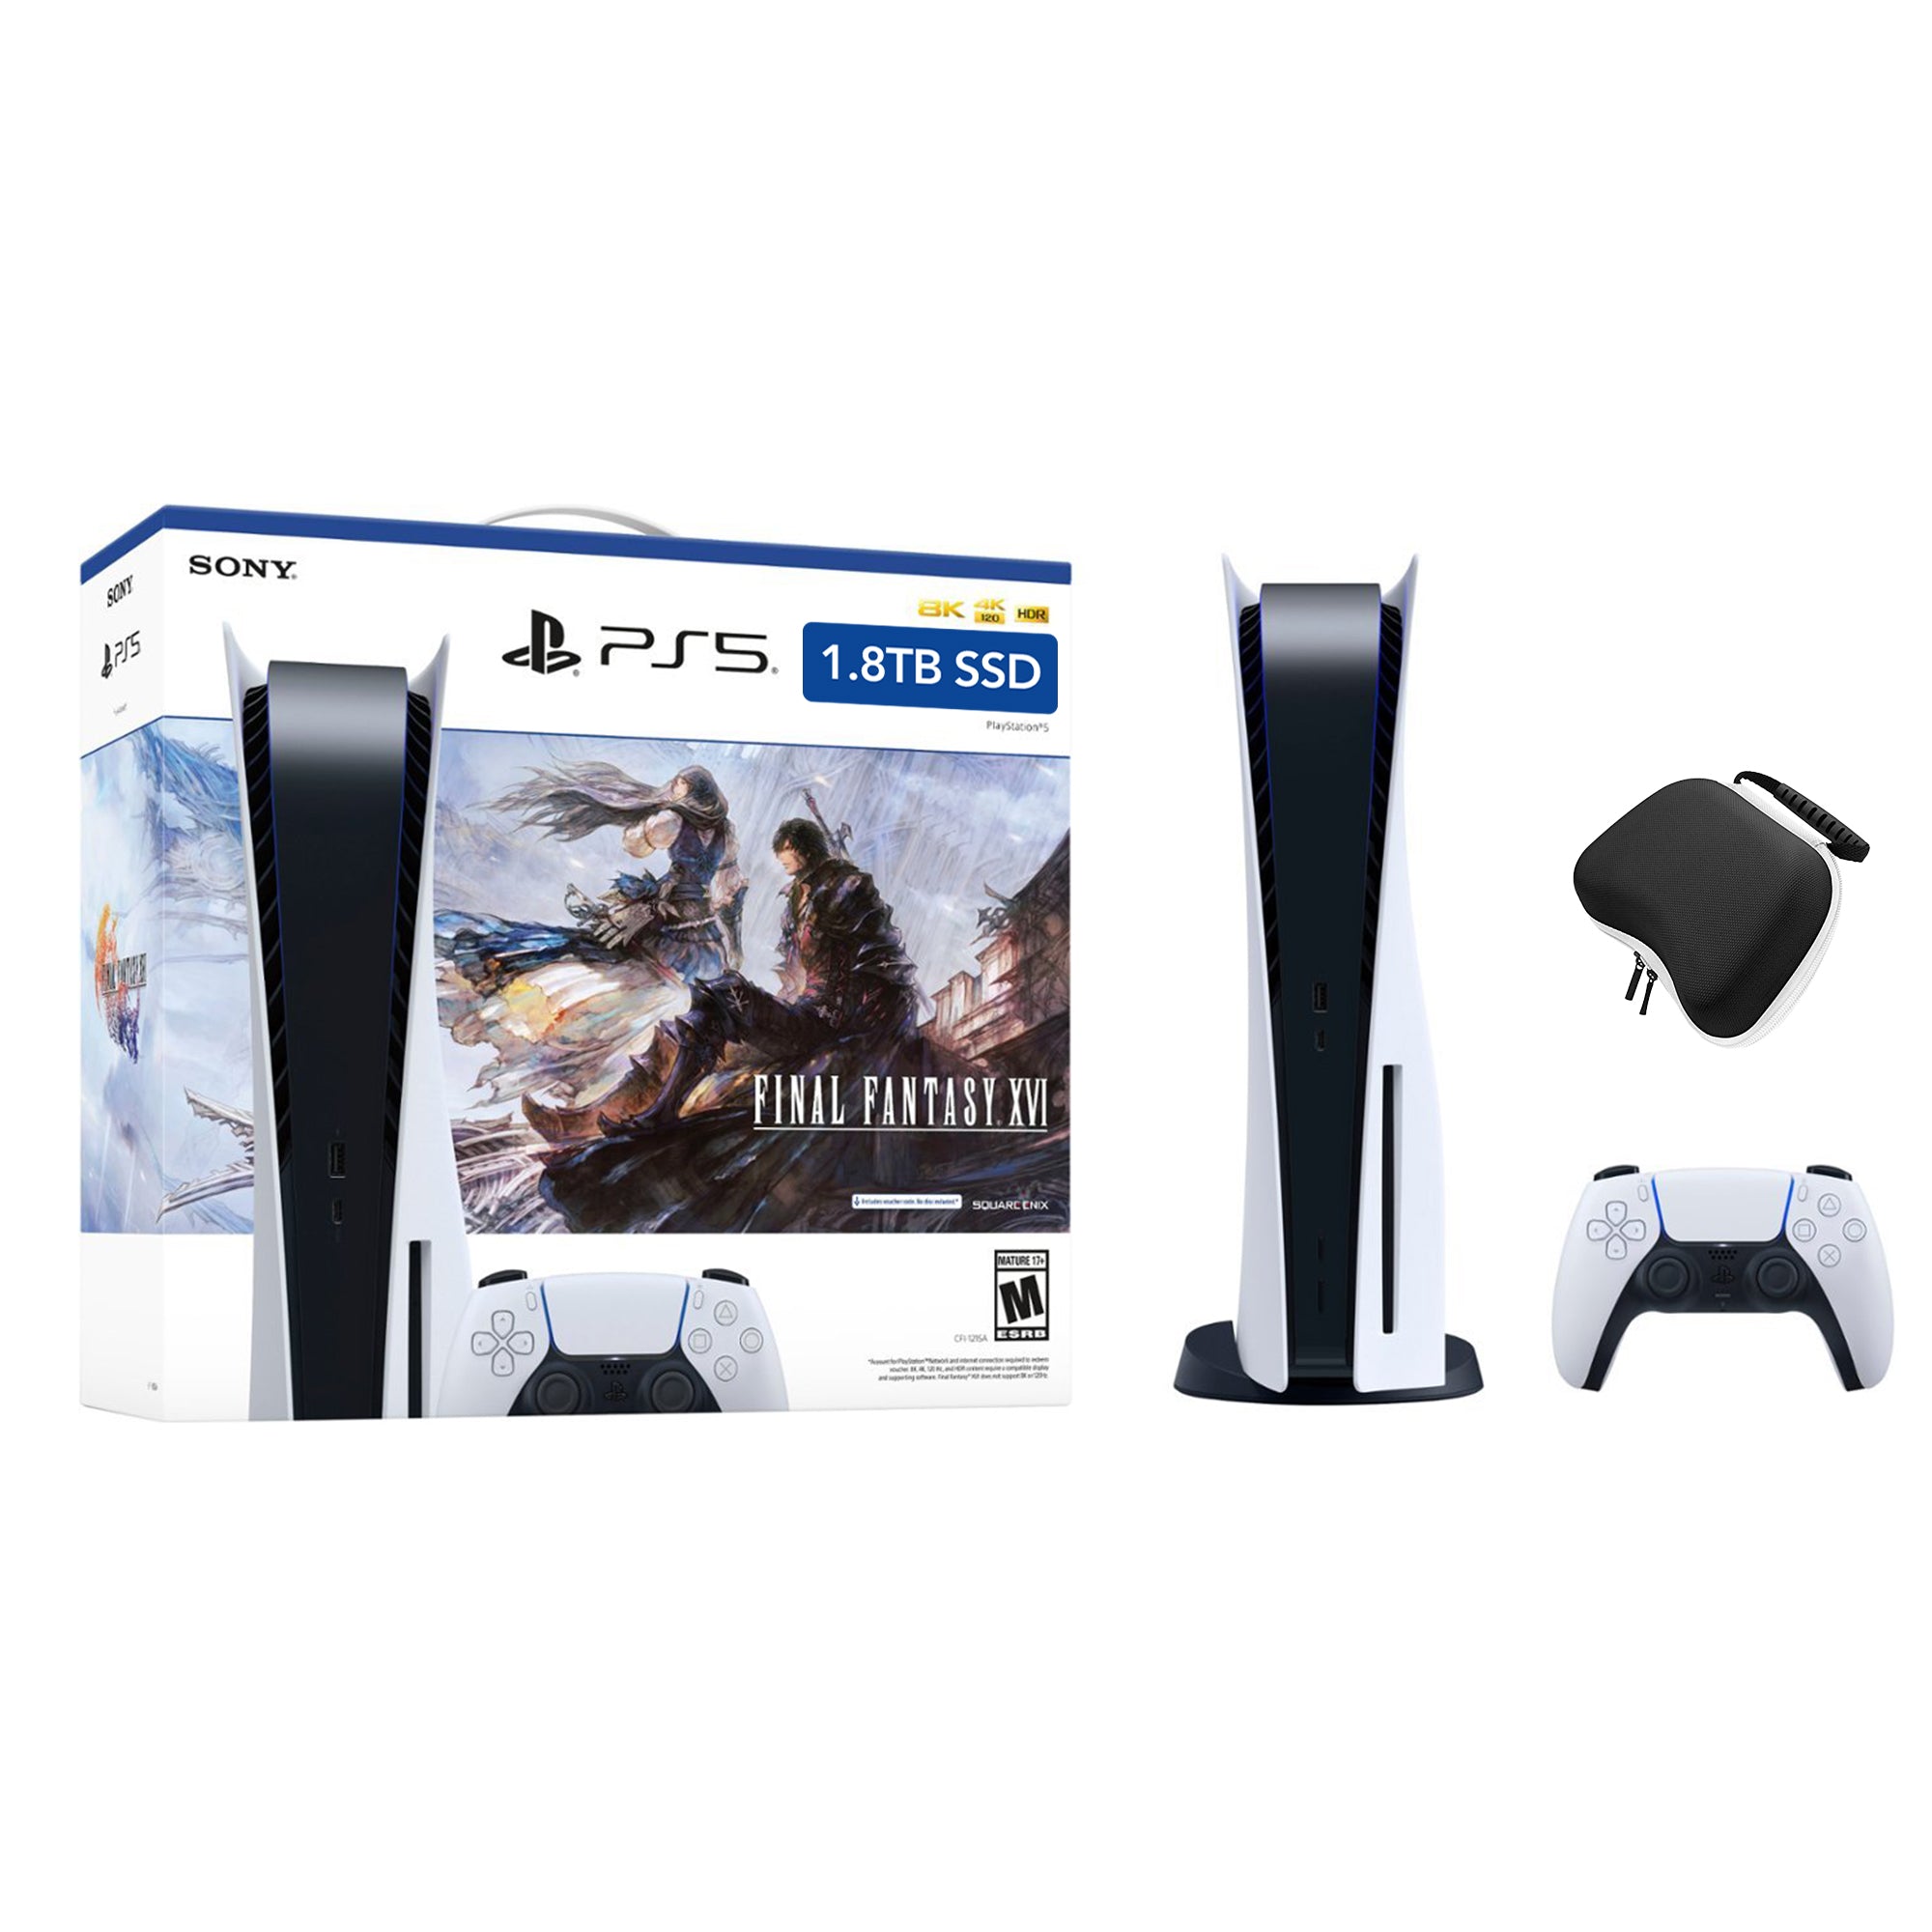 PlayStation 5 Upgraded 1.8TB Disc Edition FINAL FANTASY XVI Bundle and Mytrix Controller Case - White, PS5 Gaming Console